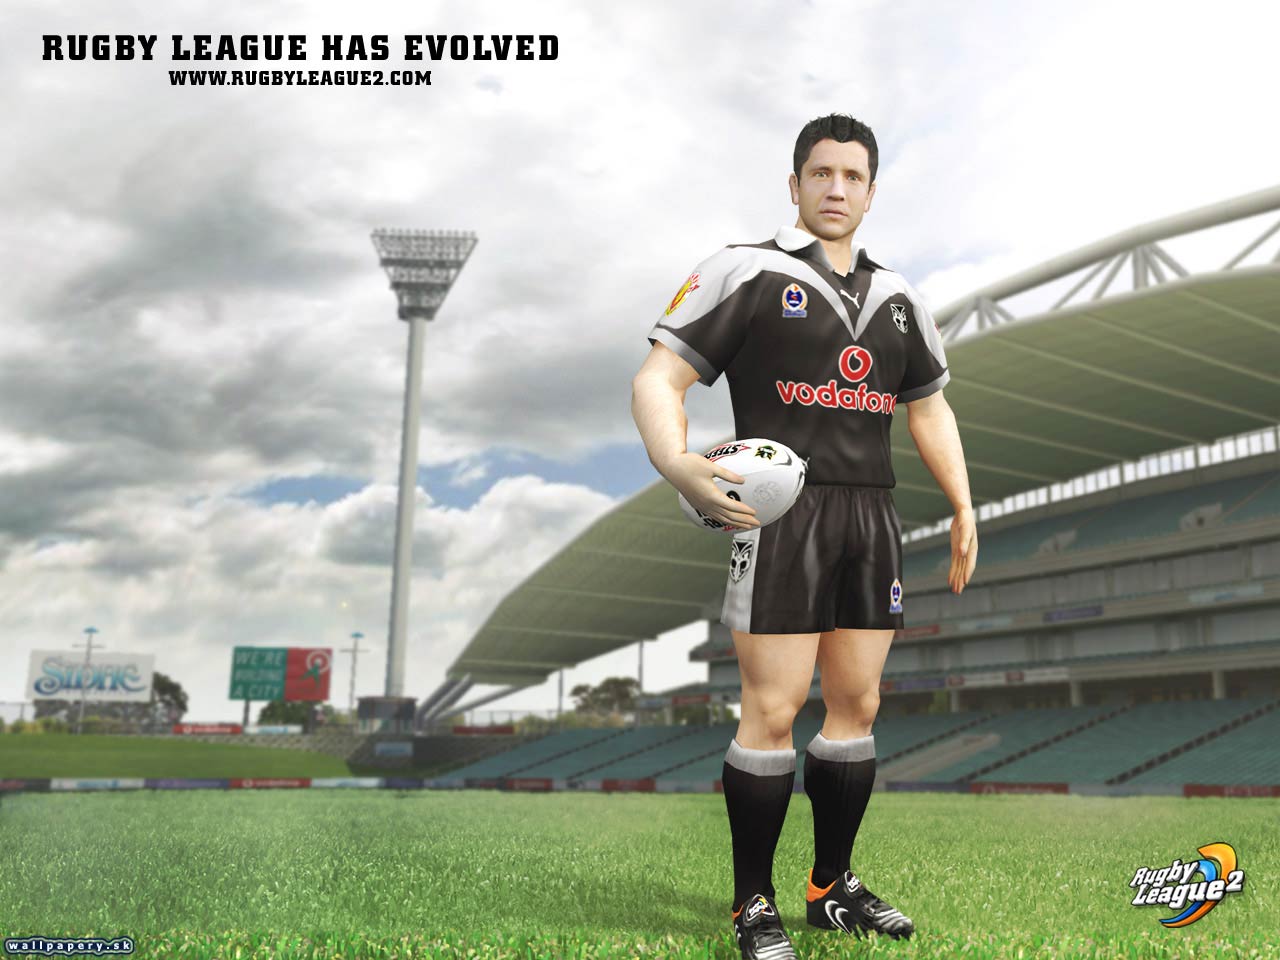 Rugby League 2 - wallpaper 1